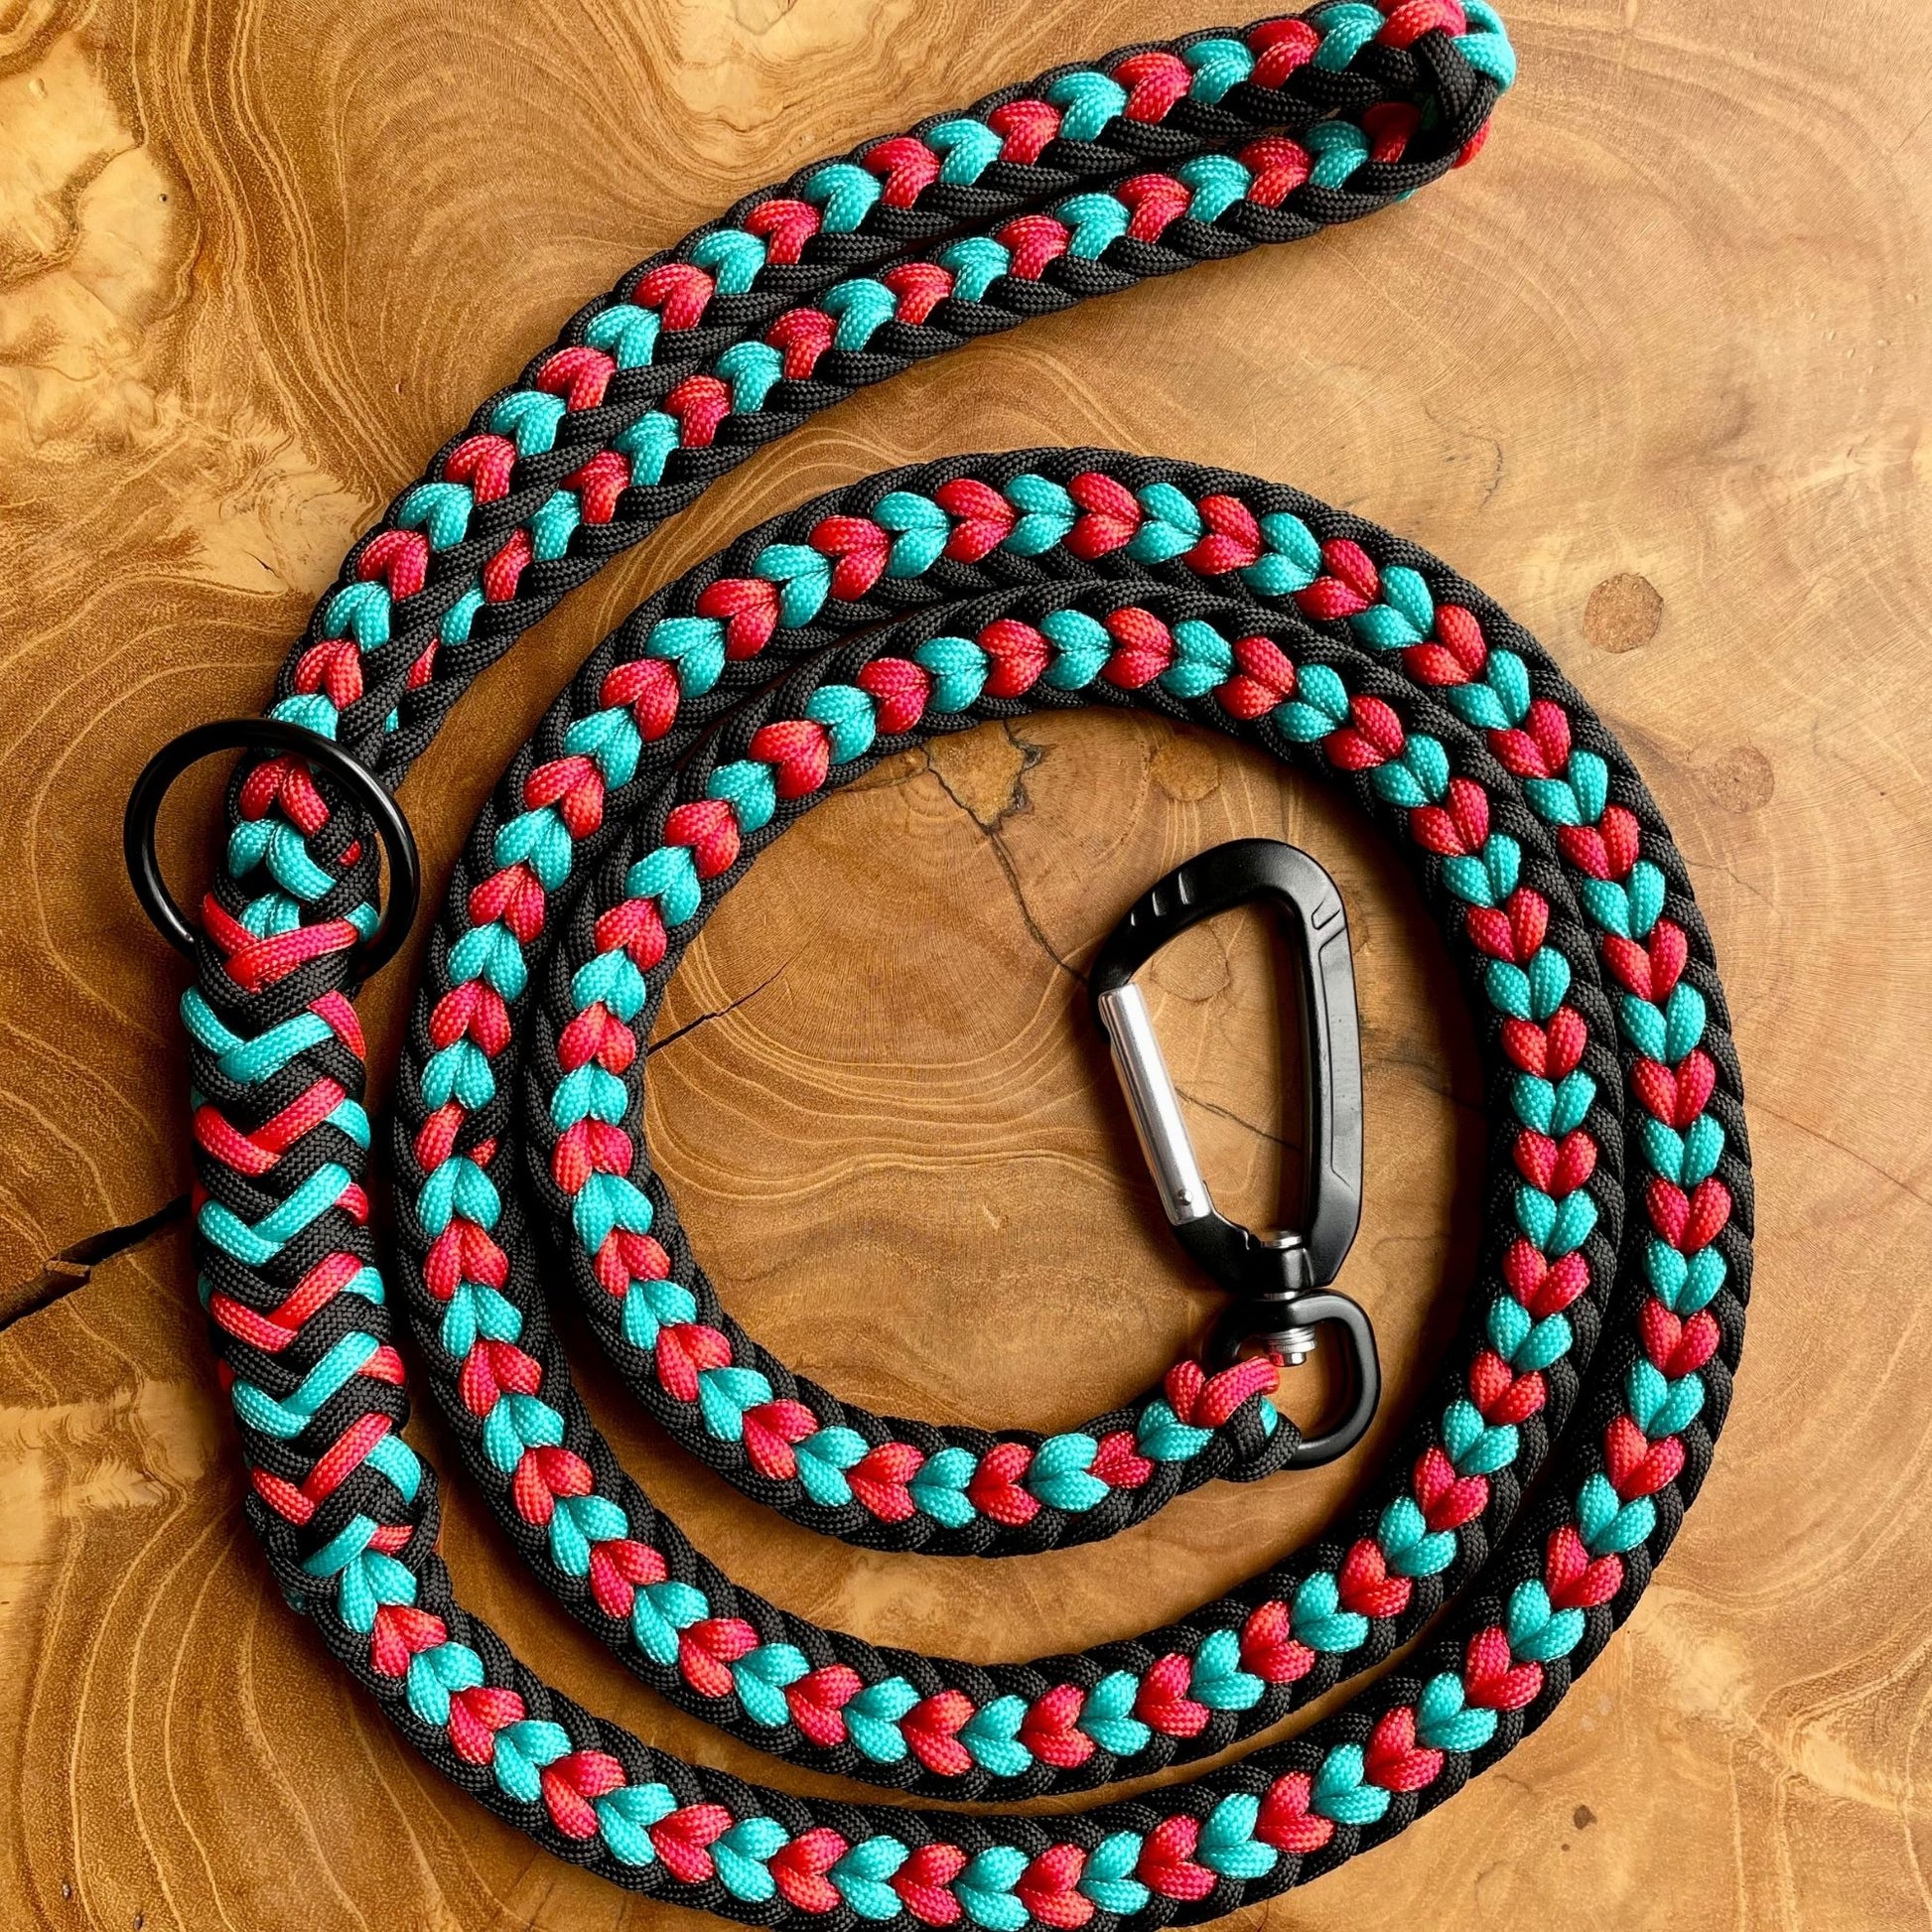 Coiled Yamnuska Paracord Dog Leash with Swivel Carabiner In Teal Orange and Red